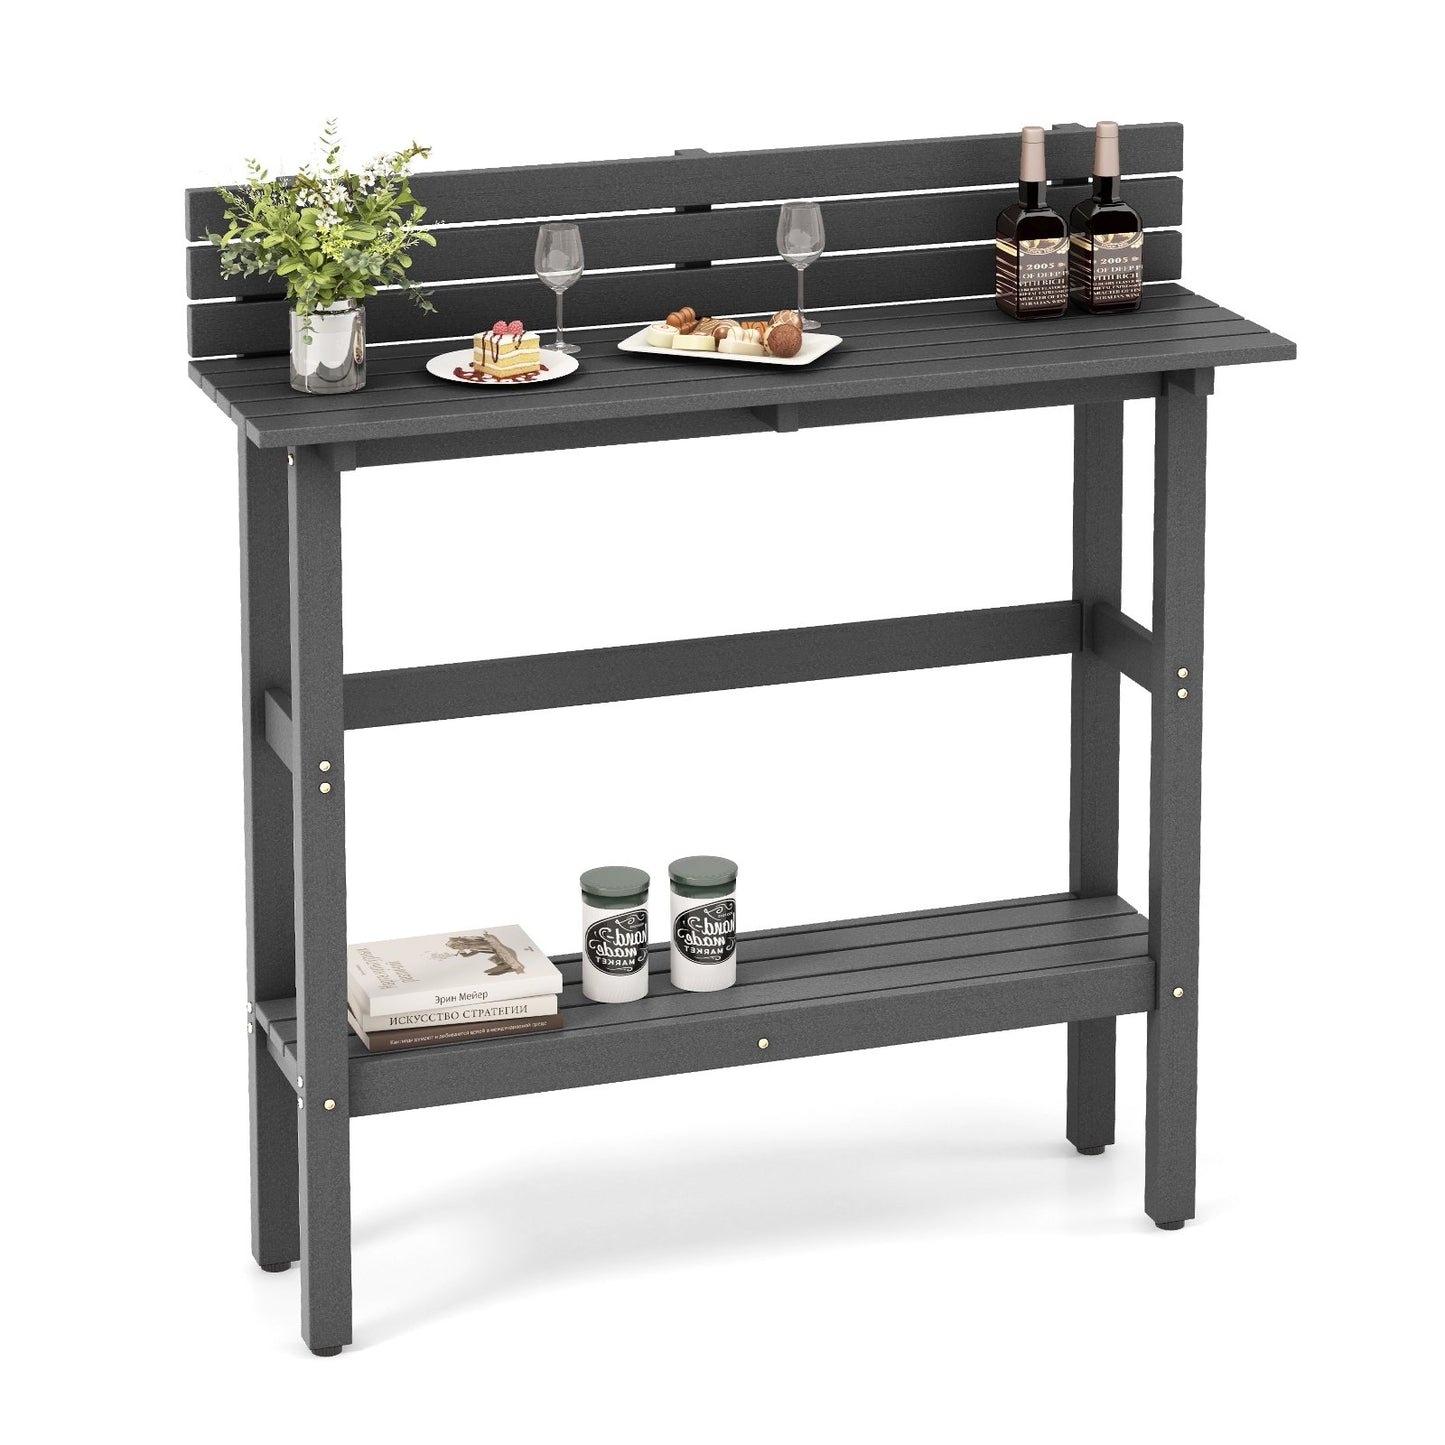 48" Patio Pub Height Table with Storage Shelf and Adjustable Foot Pads, Gray